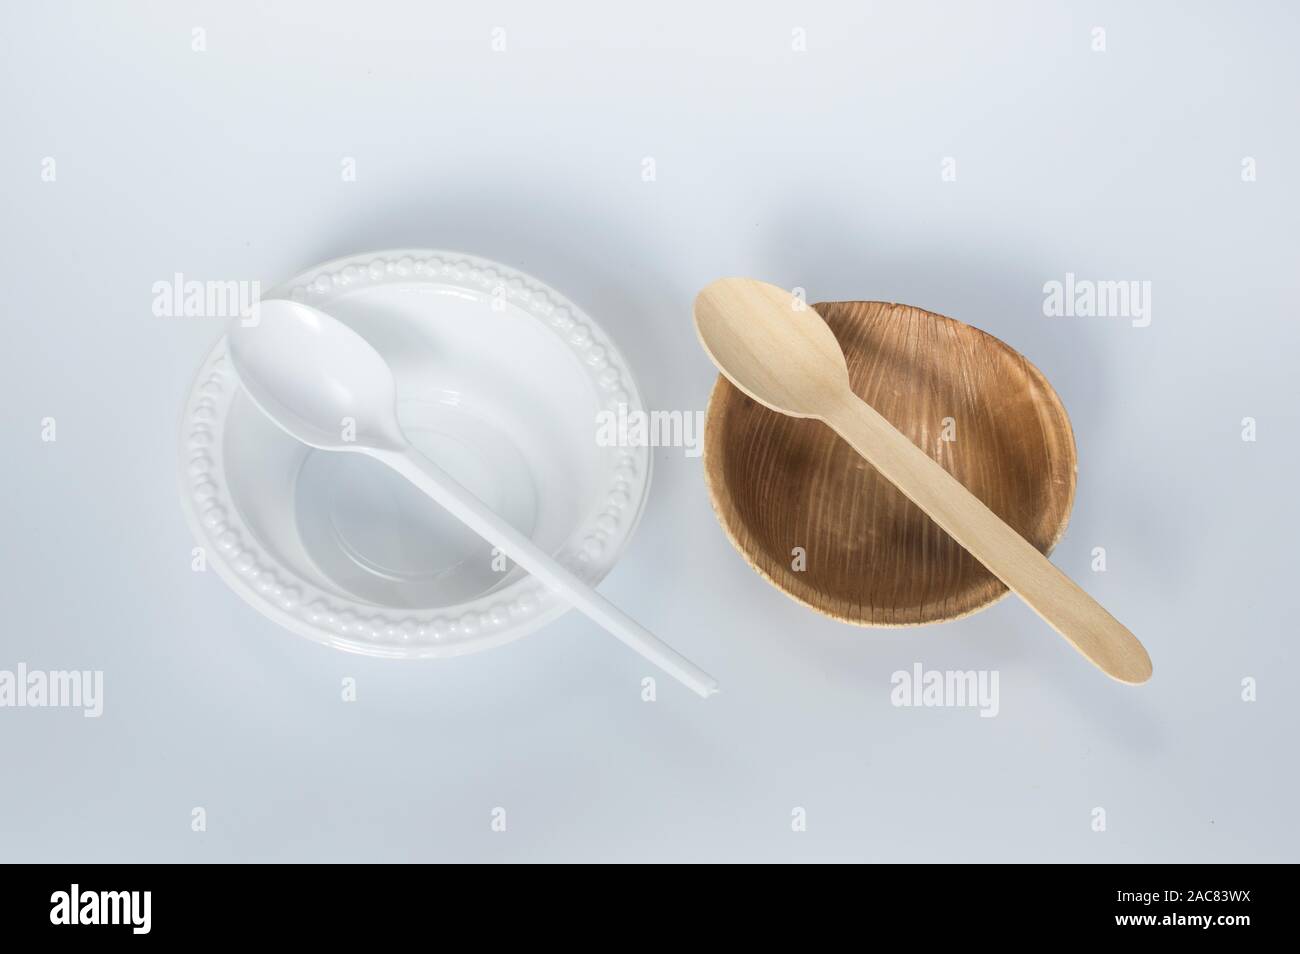 Top down view of a side by side comparison of a single use plastic cup and spoon against a palm leaf based cup and wooden spoon Stock Photo